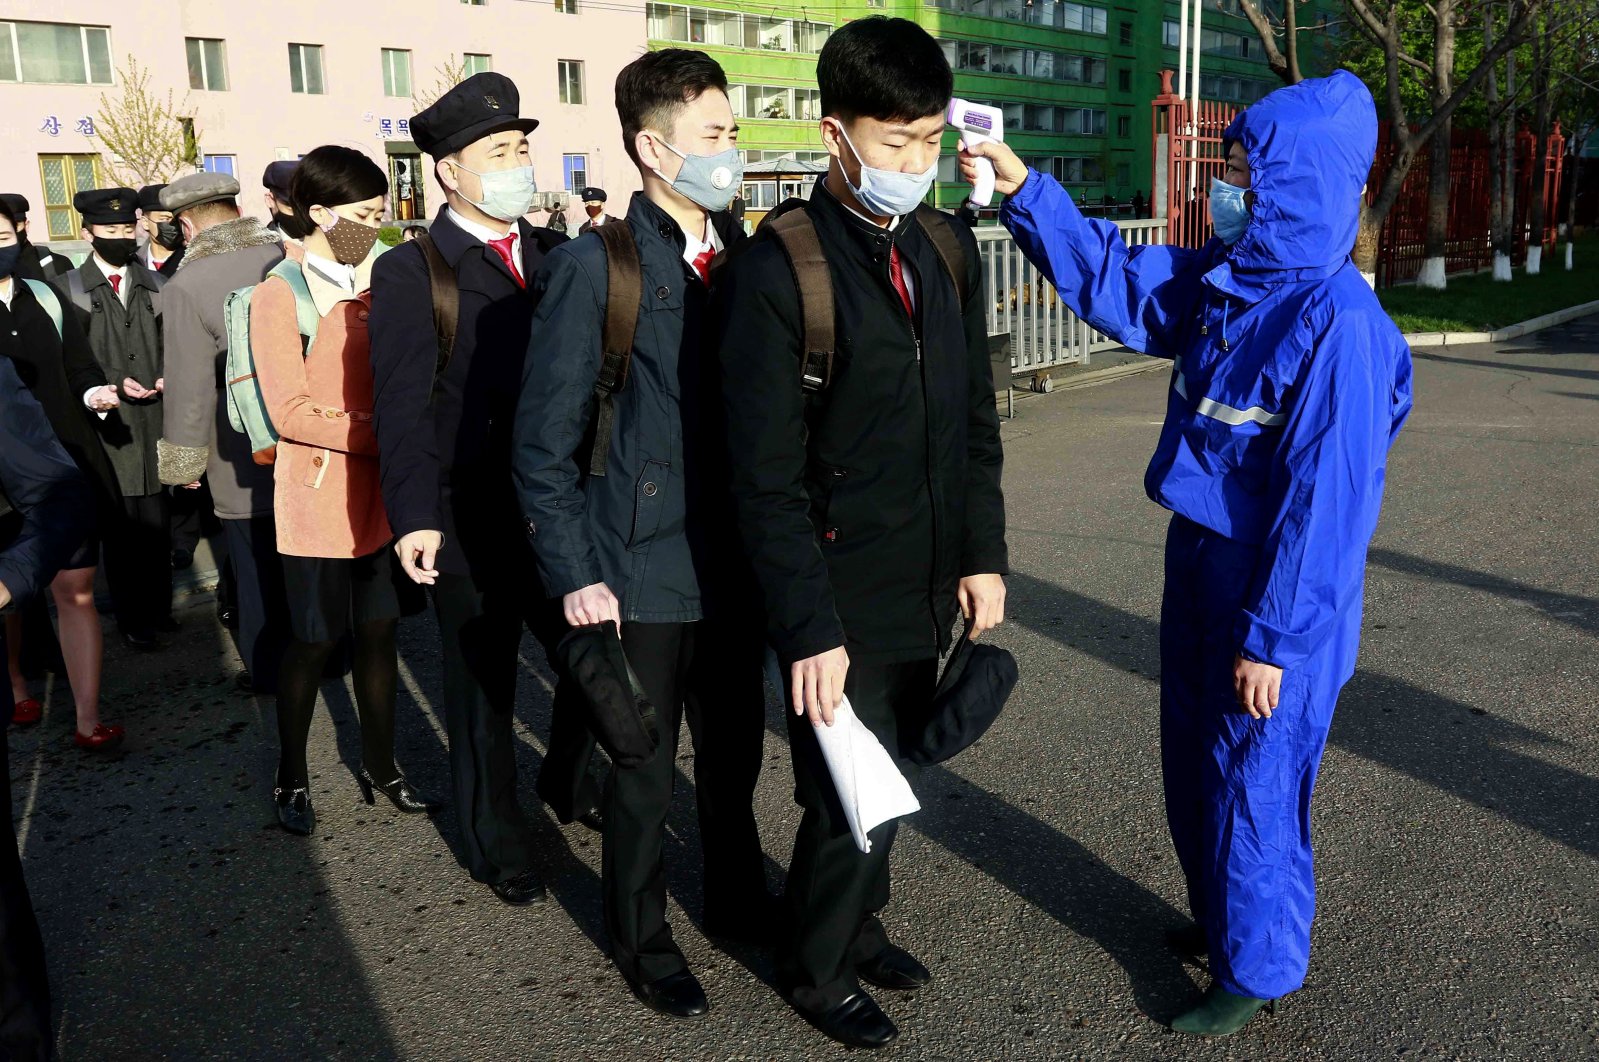 Students wearing face masks have their temperature checked as a precaution against the new coronavirus before returning to classes at Kim Chaek University of Technology, Pyongyang, North Korea, April 22, 2020. (AP Photo)